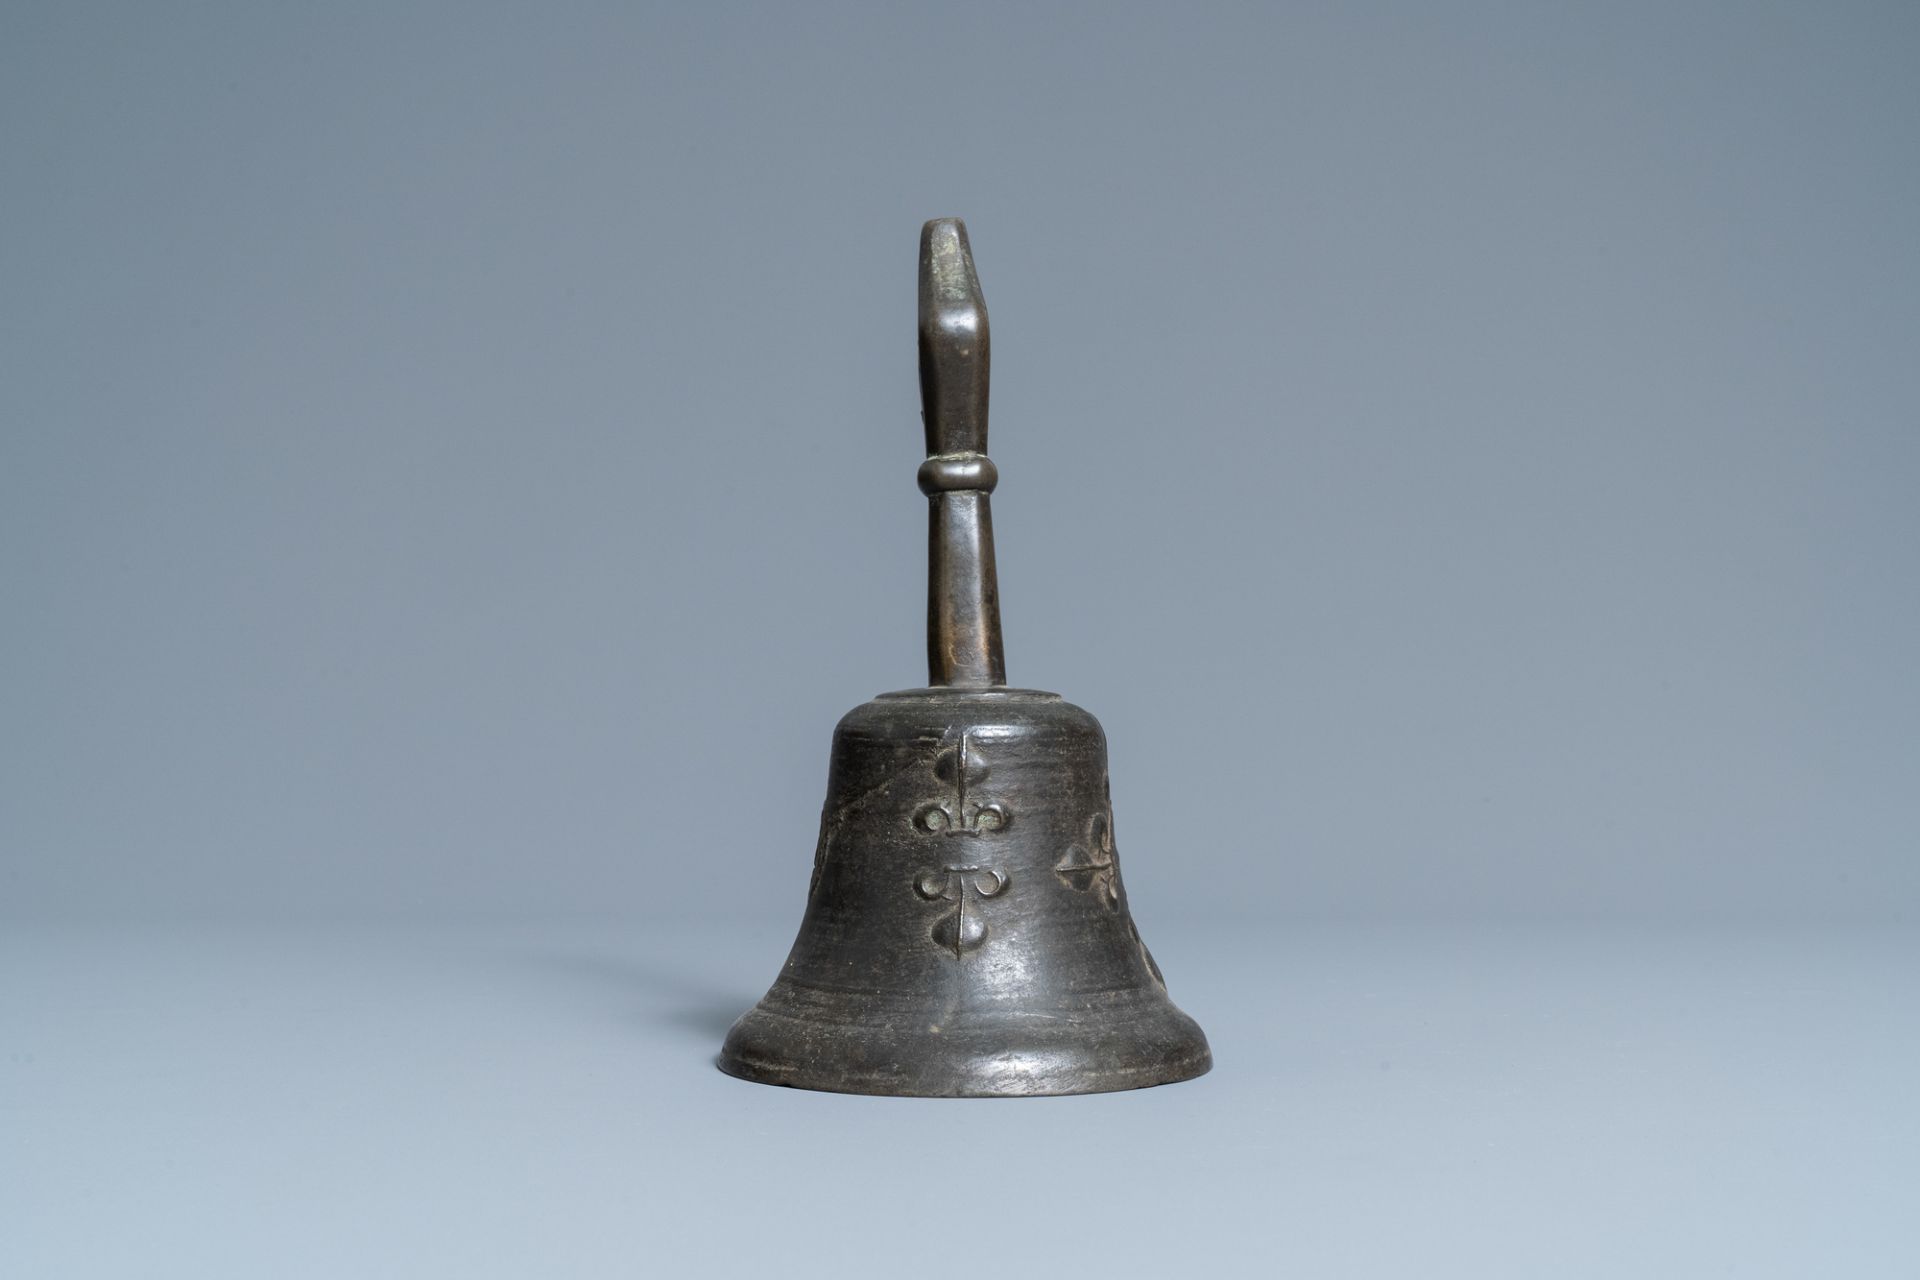 A bronze bell with applied fleur-de-lis and an IHS medallion, France, 16th C. - Image 3 of 7